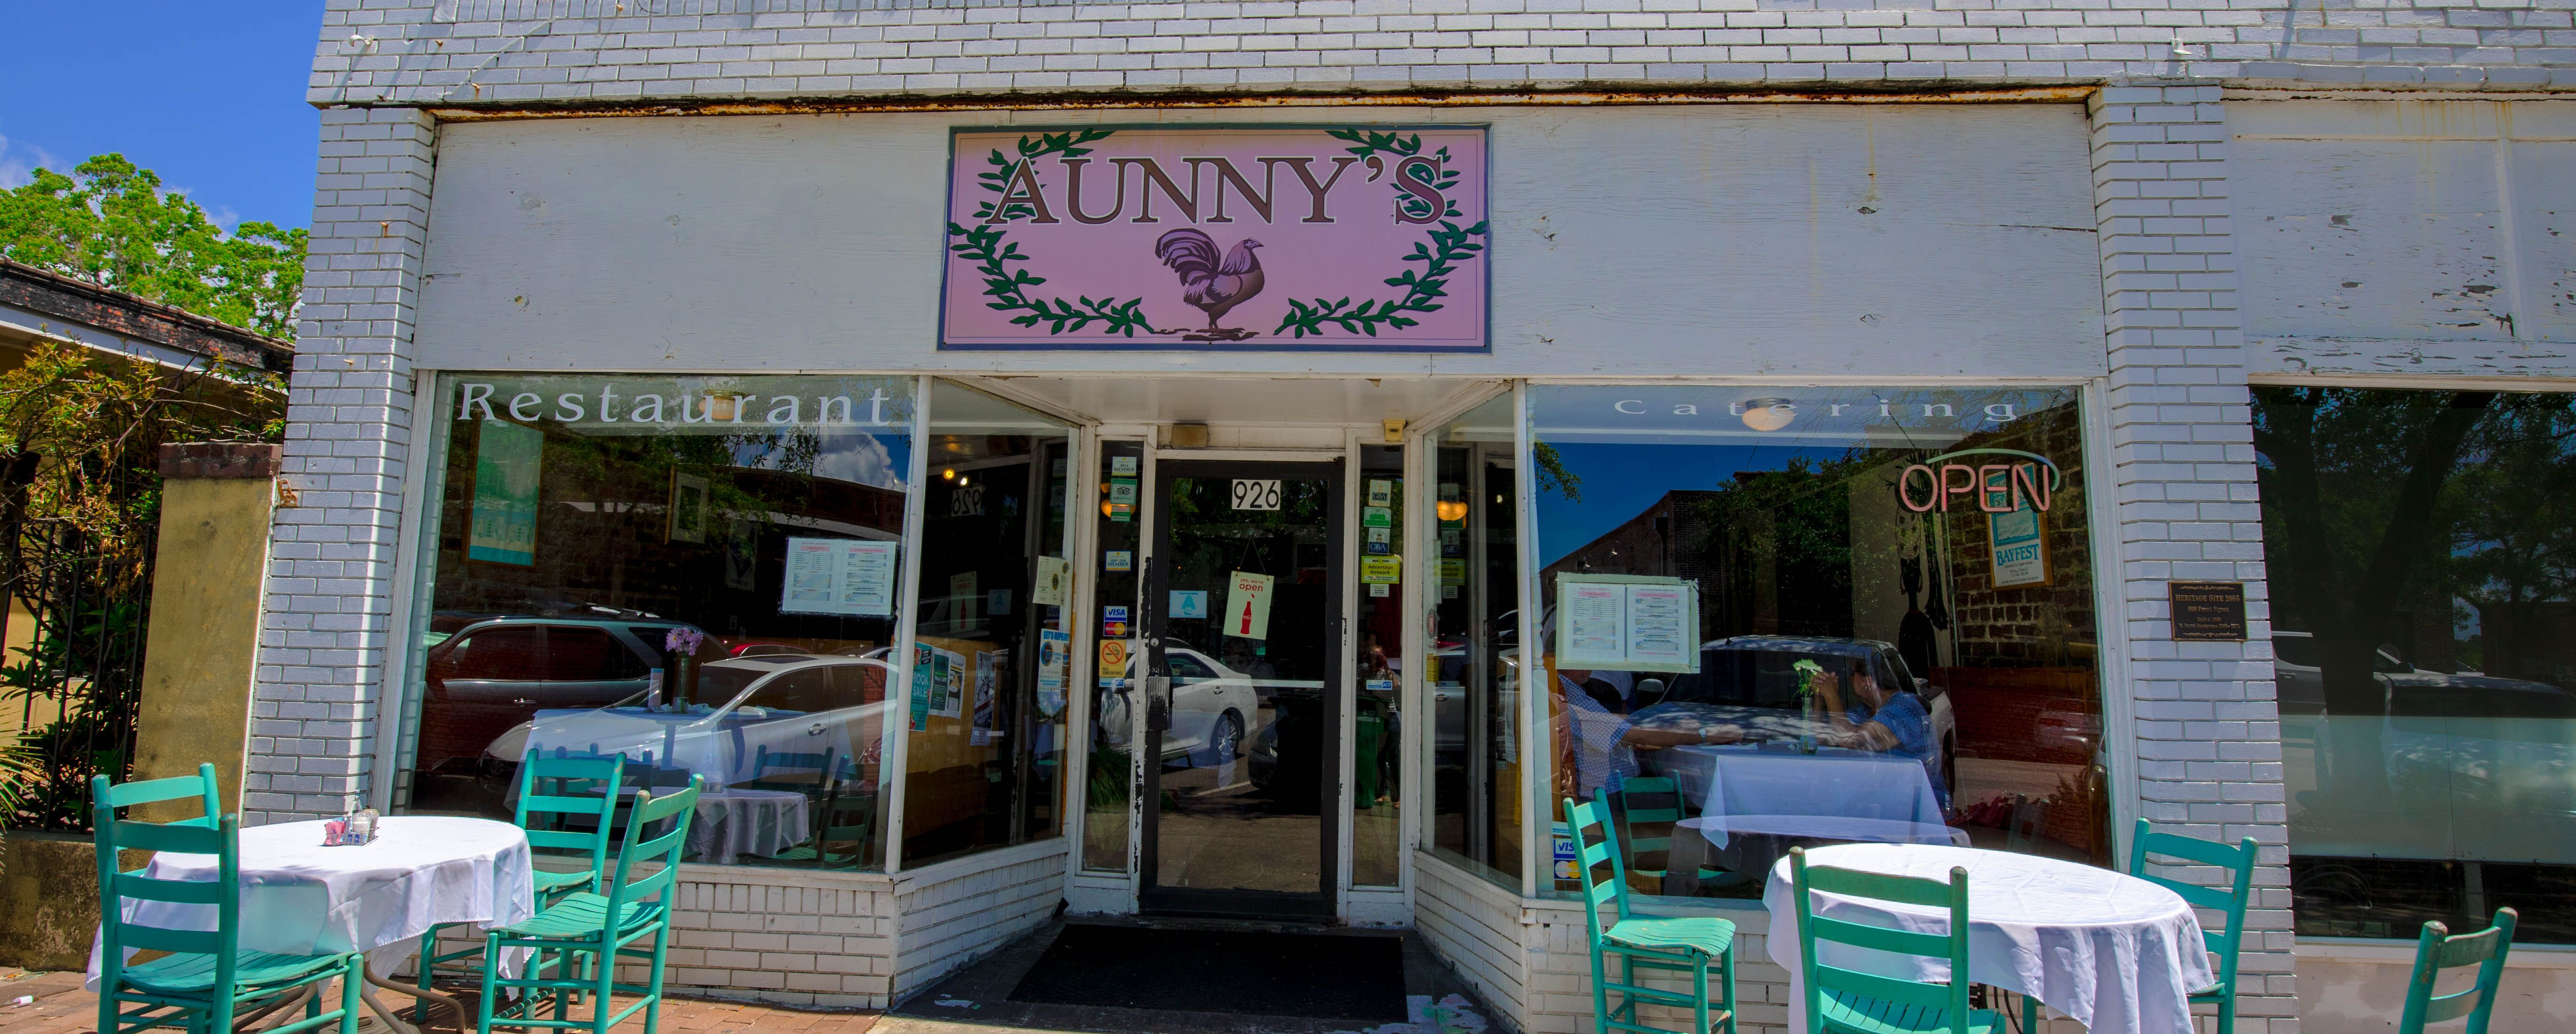 Aunny’s Country Kitchen